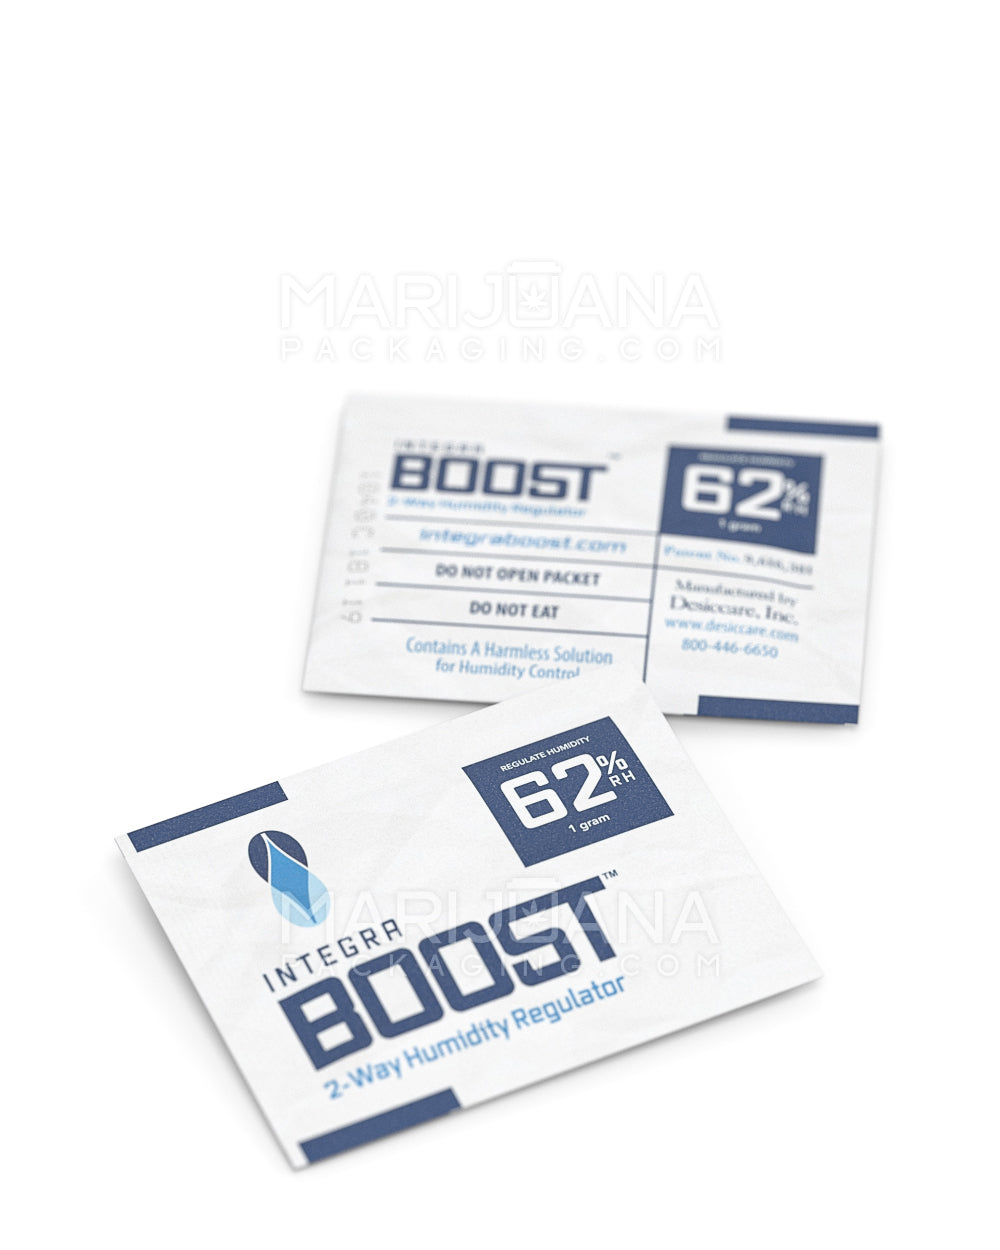 INTEGRA | Boost Humidity Pack | 1 Gram - 62% - 100 Count - 5